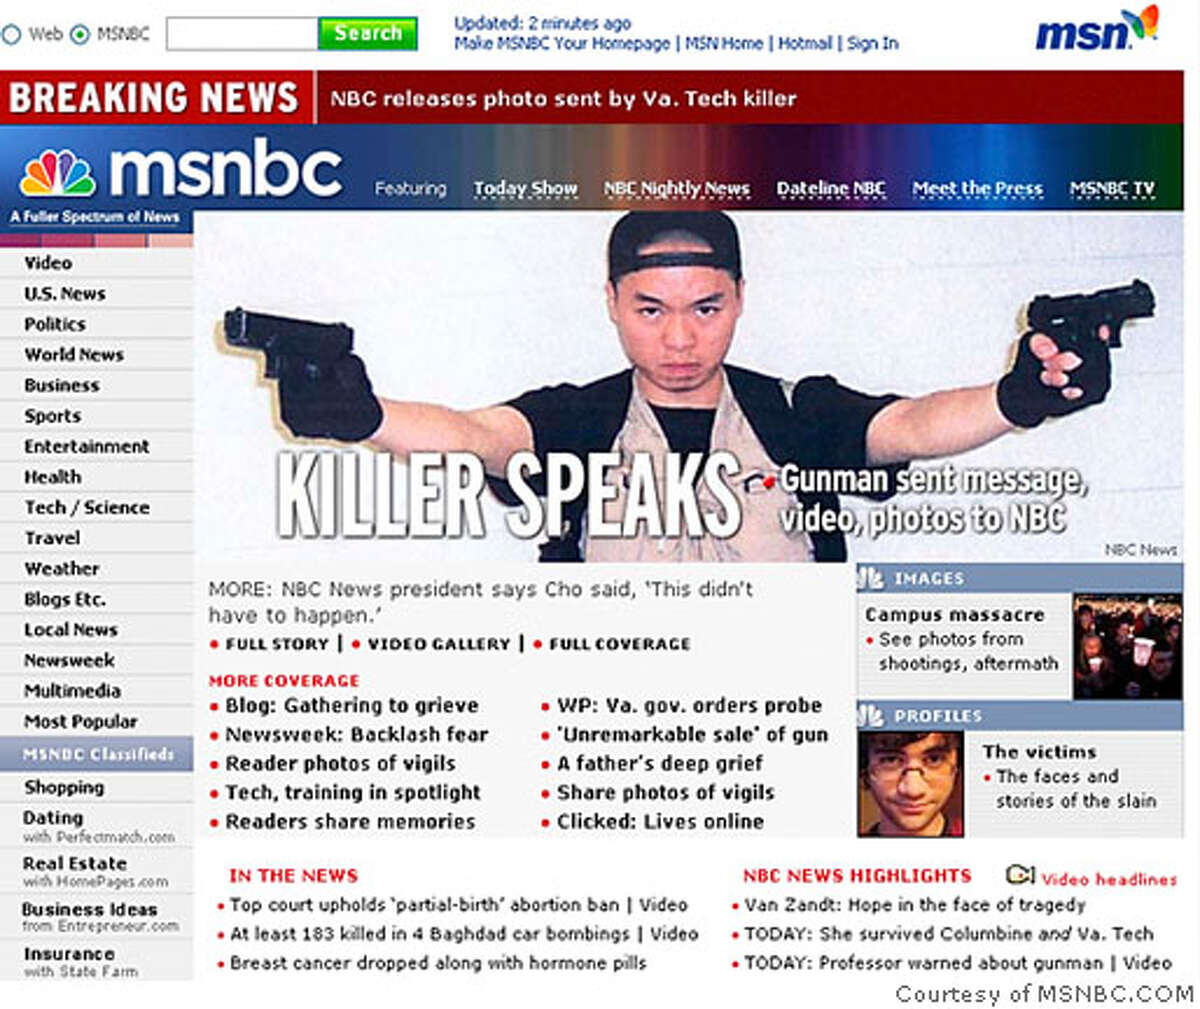 The front page of MSNBC.COM is seen after NBC News posted a picture they say was received from Cho Seung-Hui, the shooter in the Virginia Tech shootings, April 18, 2007. The gunman who went on a deadly rampage at Virginia Tech university this week paused between shootings to mail a rambling account of grievances, photos and videos to NBC, the network said. REUTERS/Courtesy of MSNBC.COM/Handout (UNITED STATES). EDITORIAL USE ONLY. NOT FOR SALE FOR MARKETING OR ADVERTISING CAMPAIGNS. NO ARCHIVES. NO SALES.